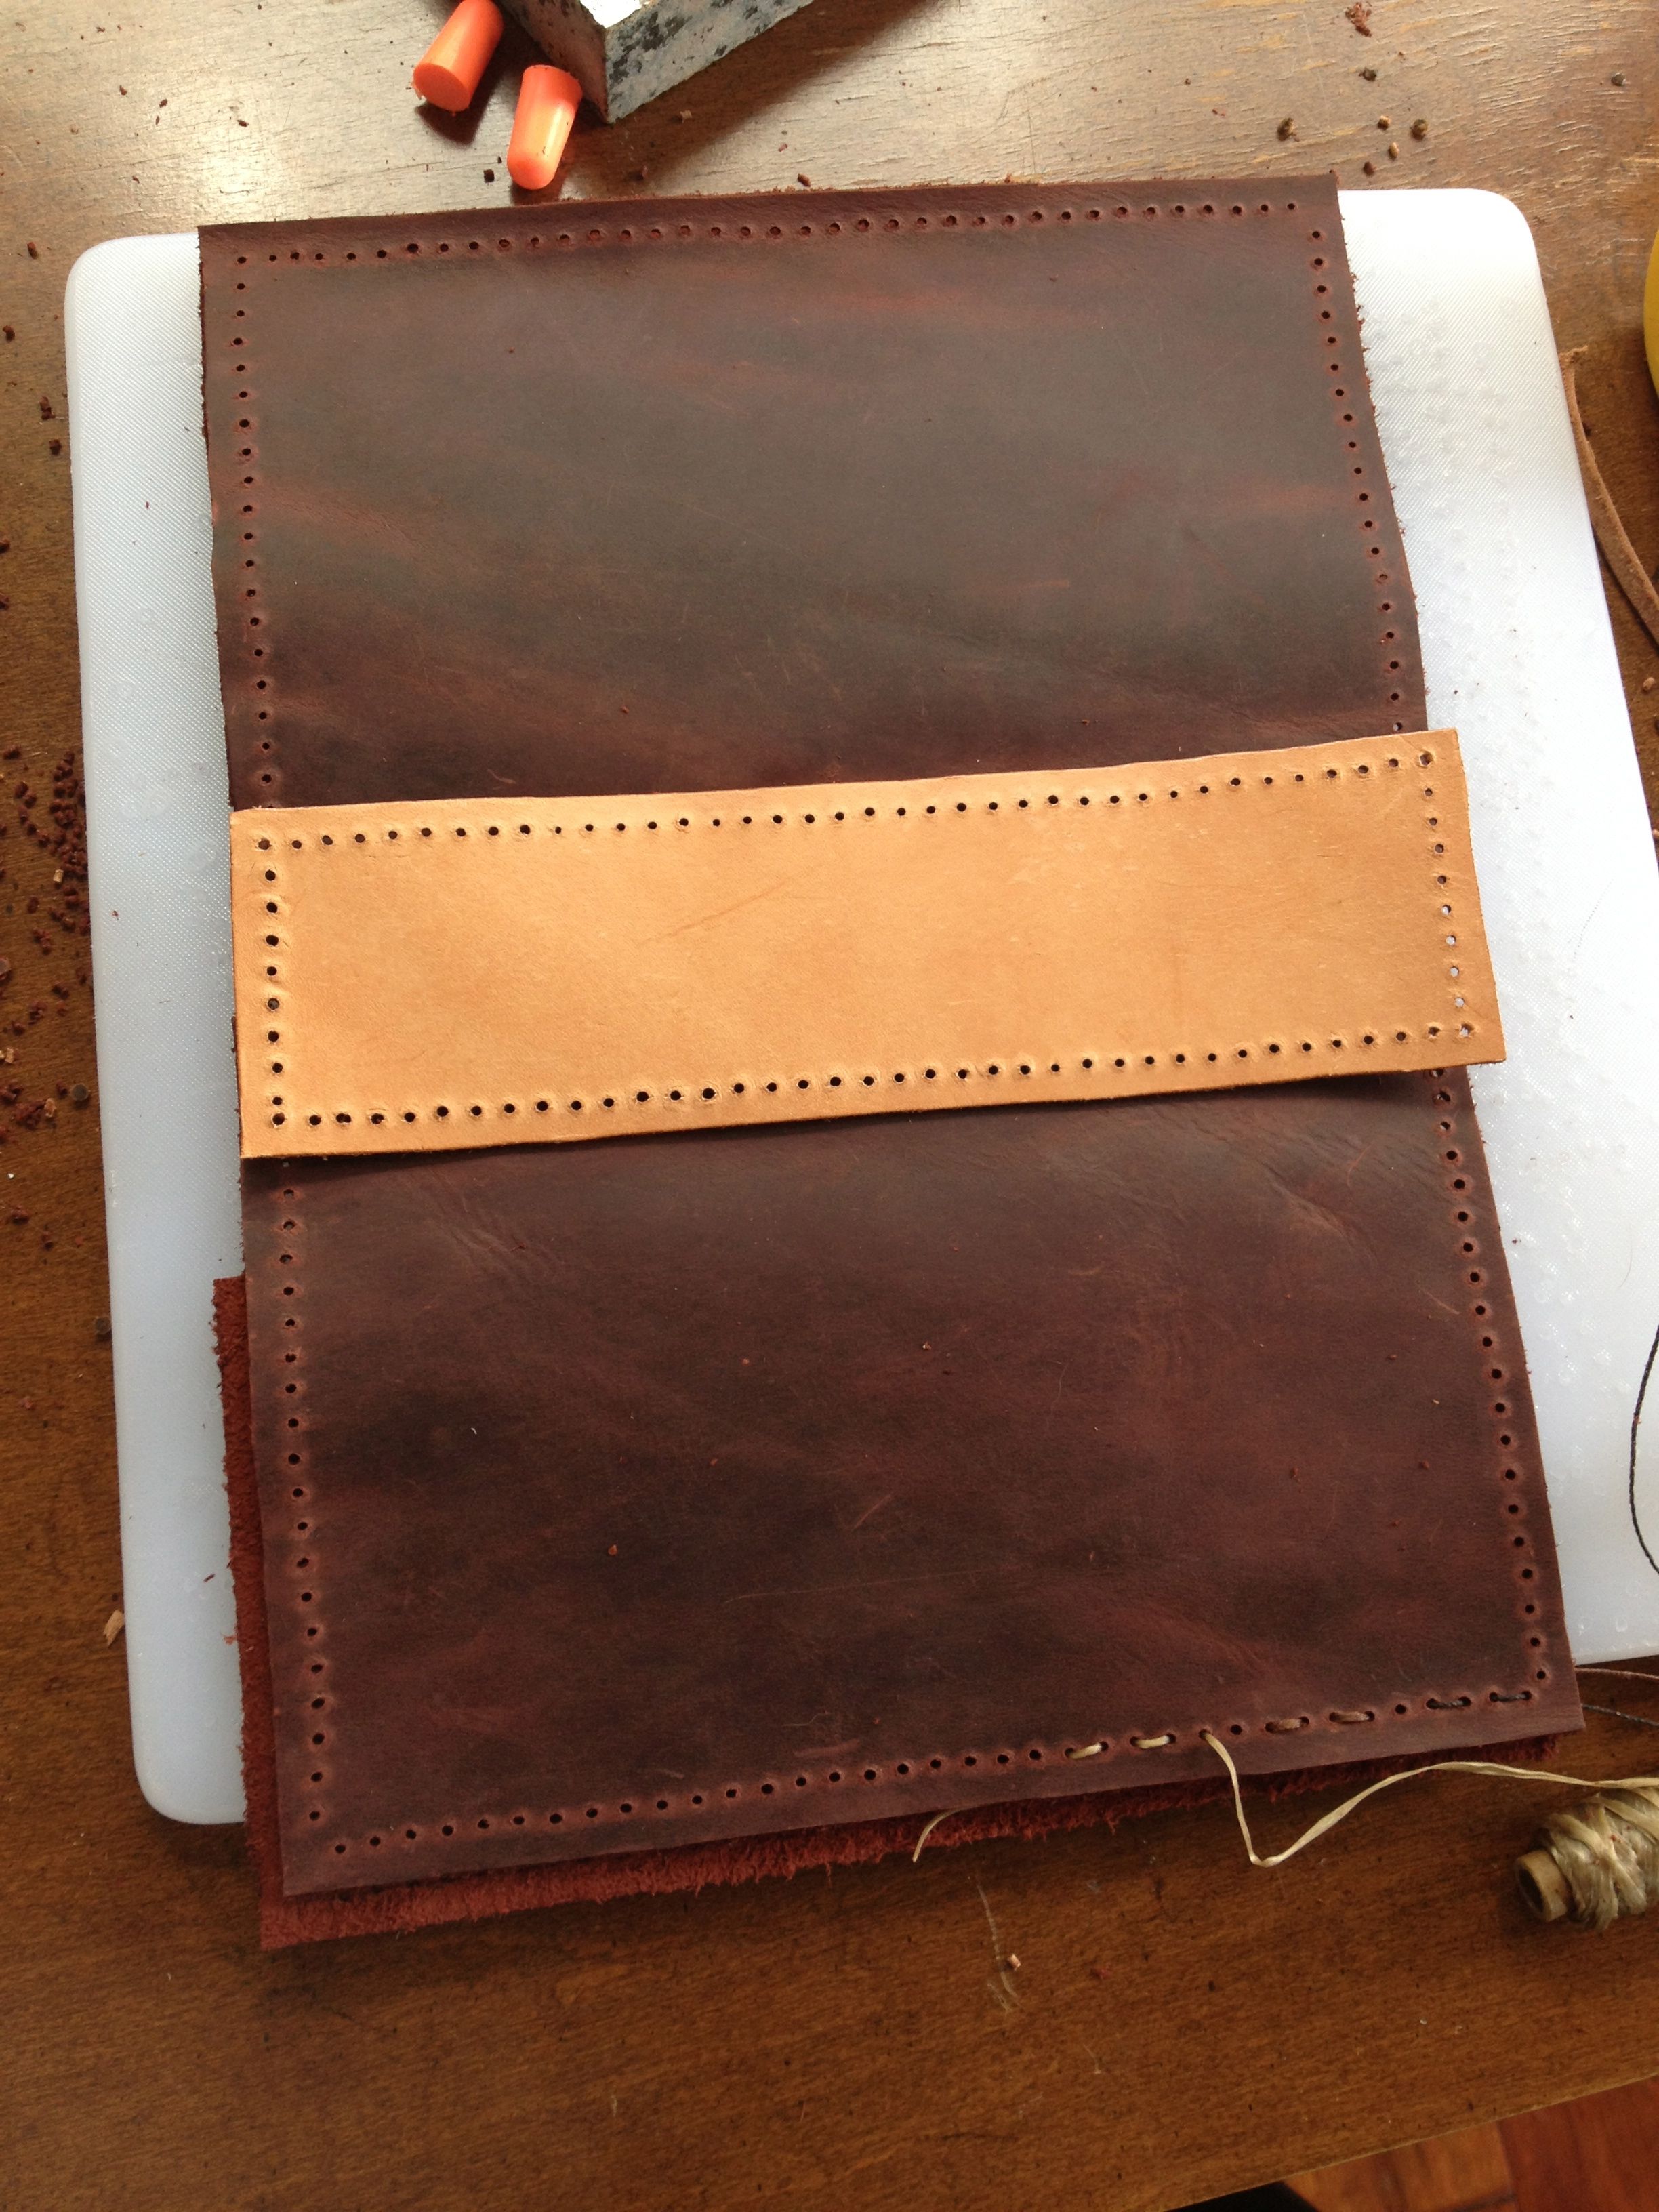 Hand Crafted Leather Book Cover by Sabbatical Arts | CustomMade.com